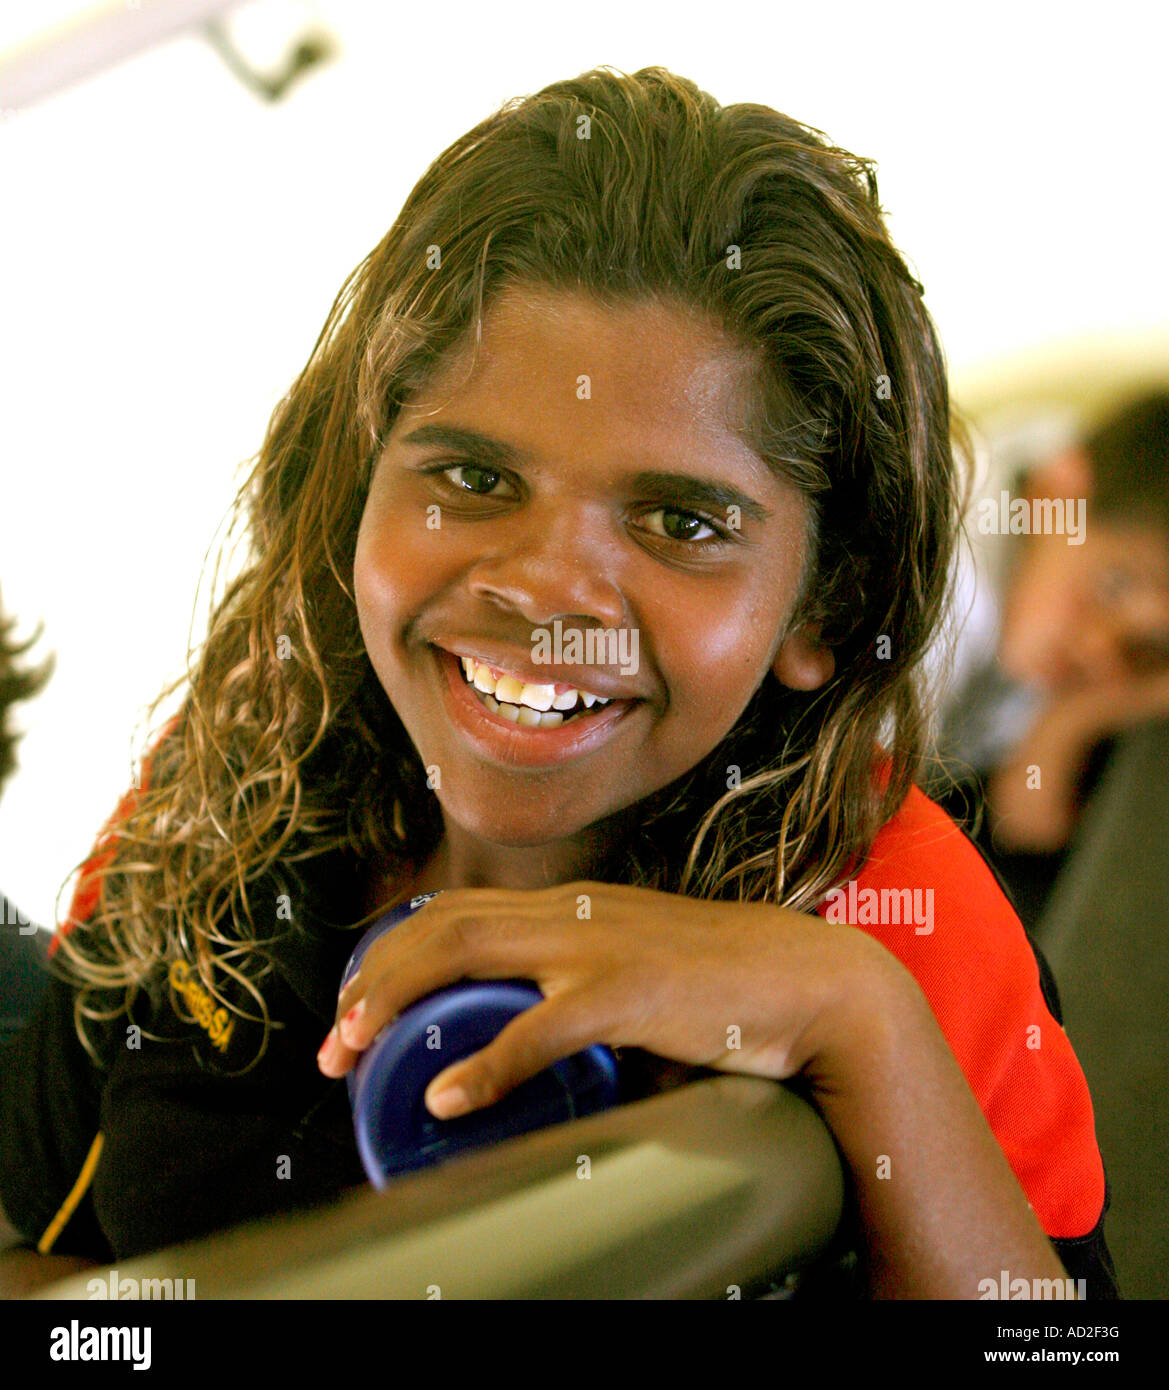 [Image: a-beautiful-smiling-young-aboriginal-girl-AD2F3G.jpg]